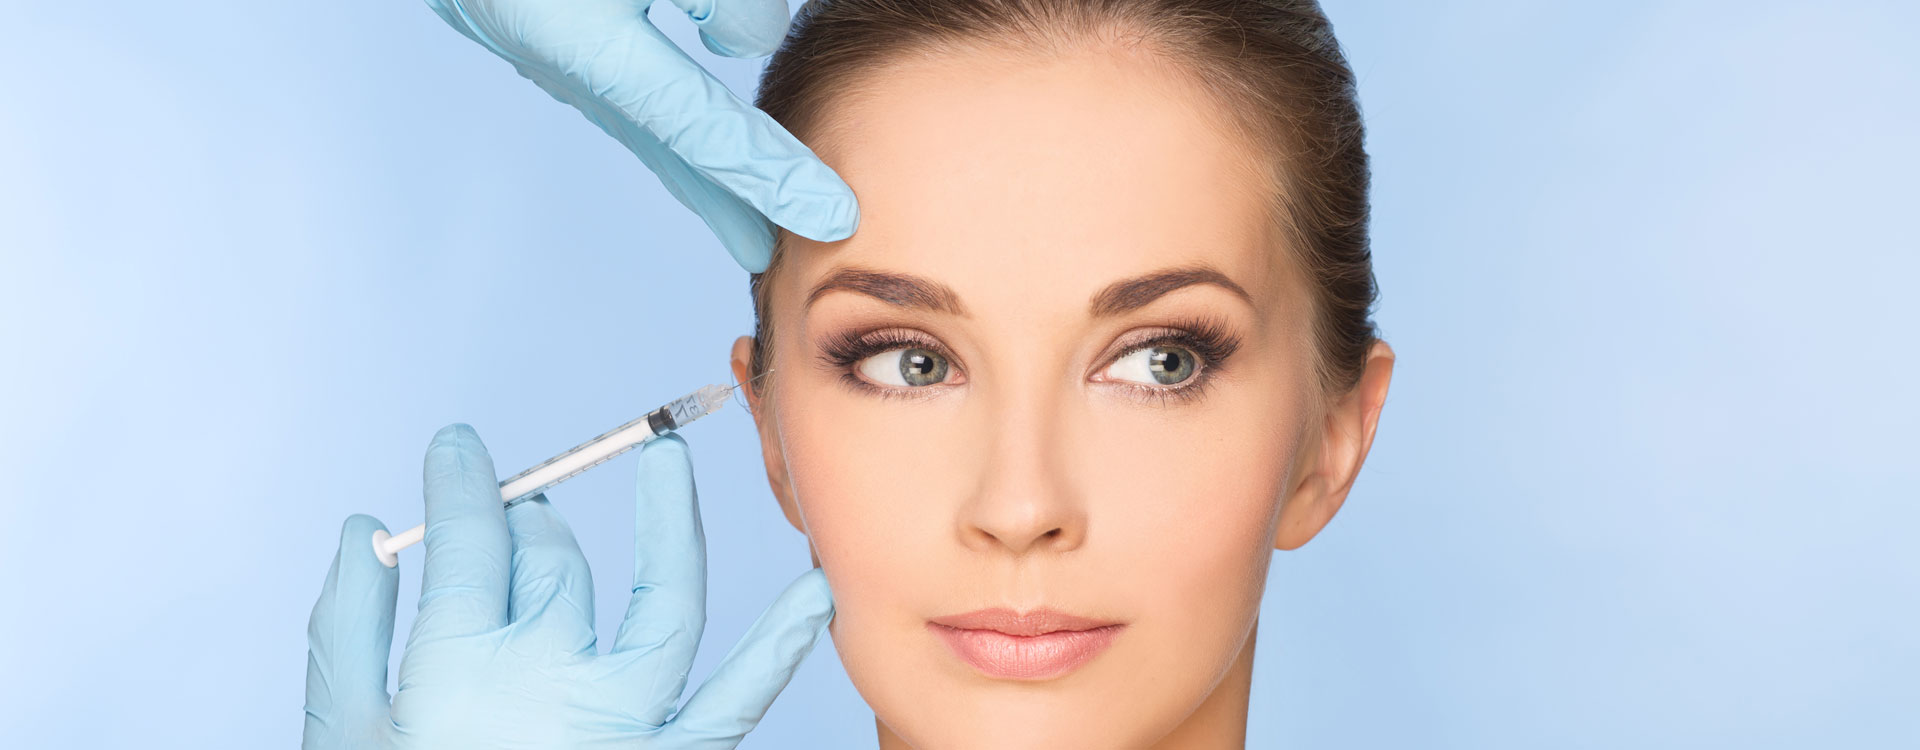 Beauty woman giving botox injections.